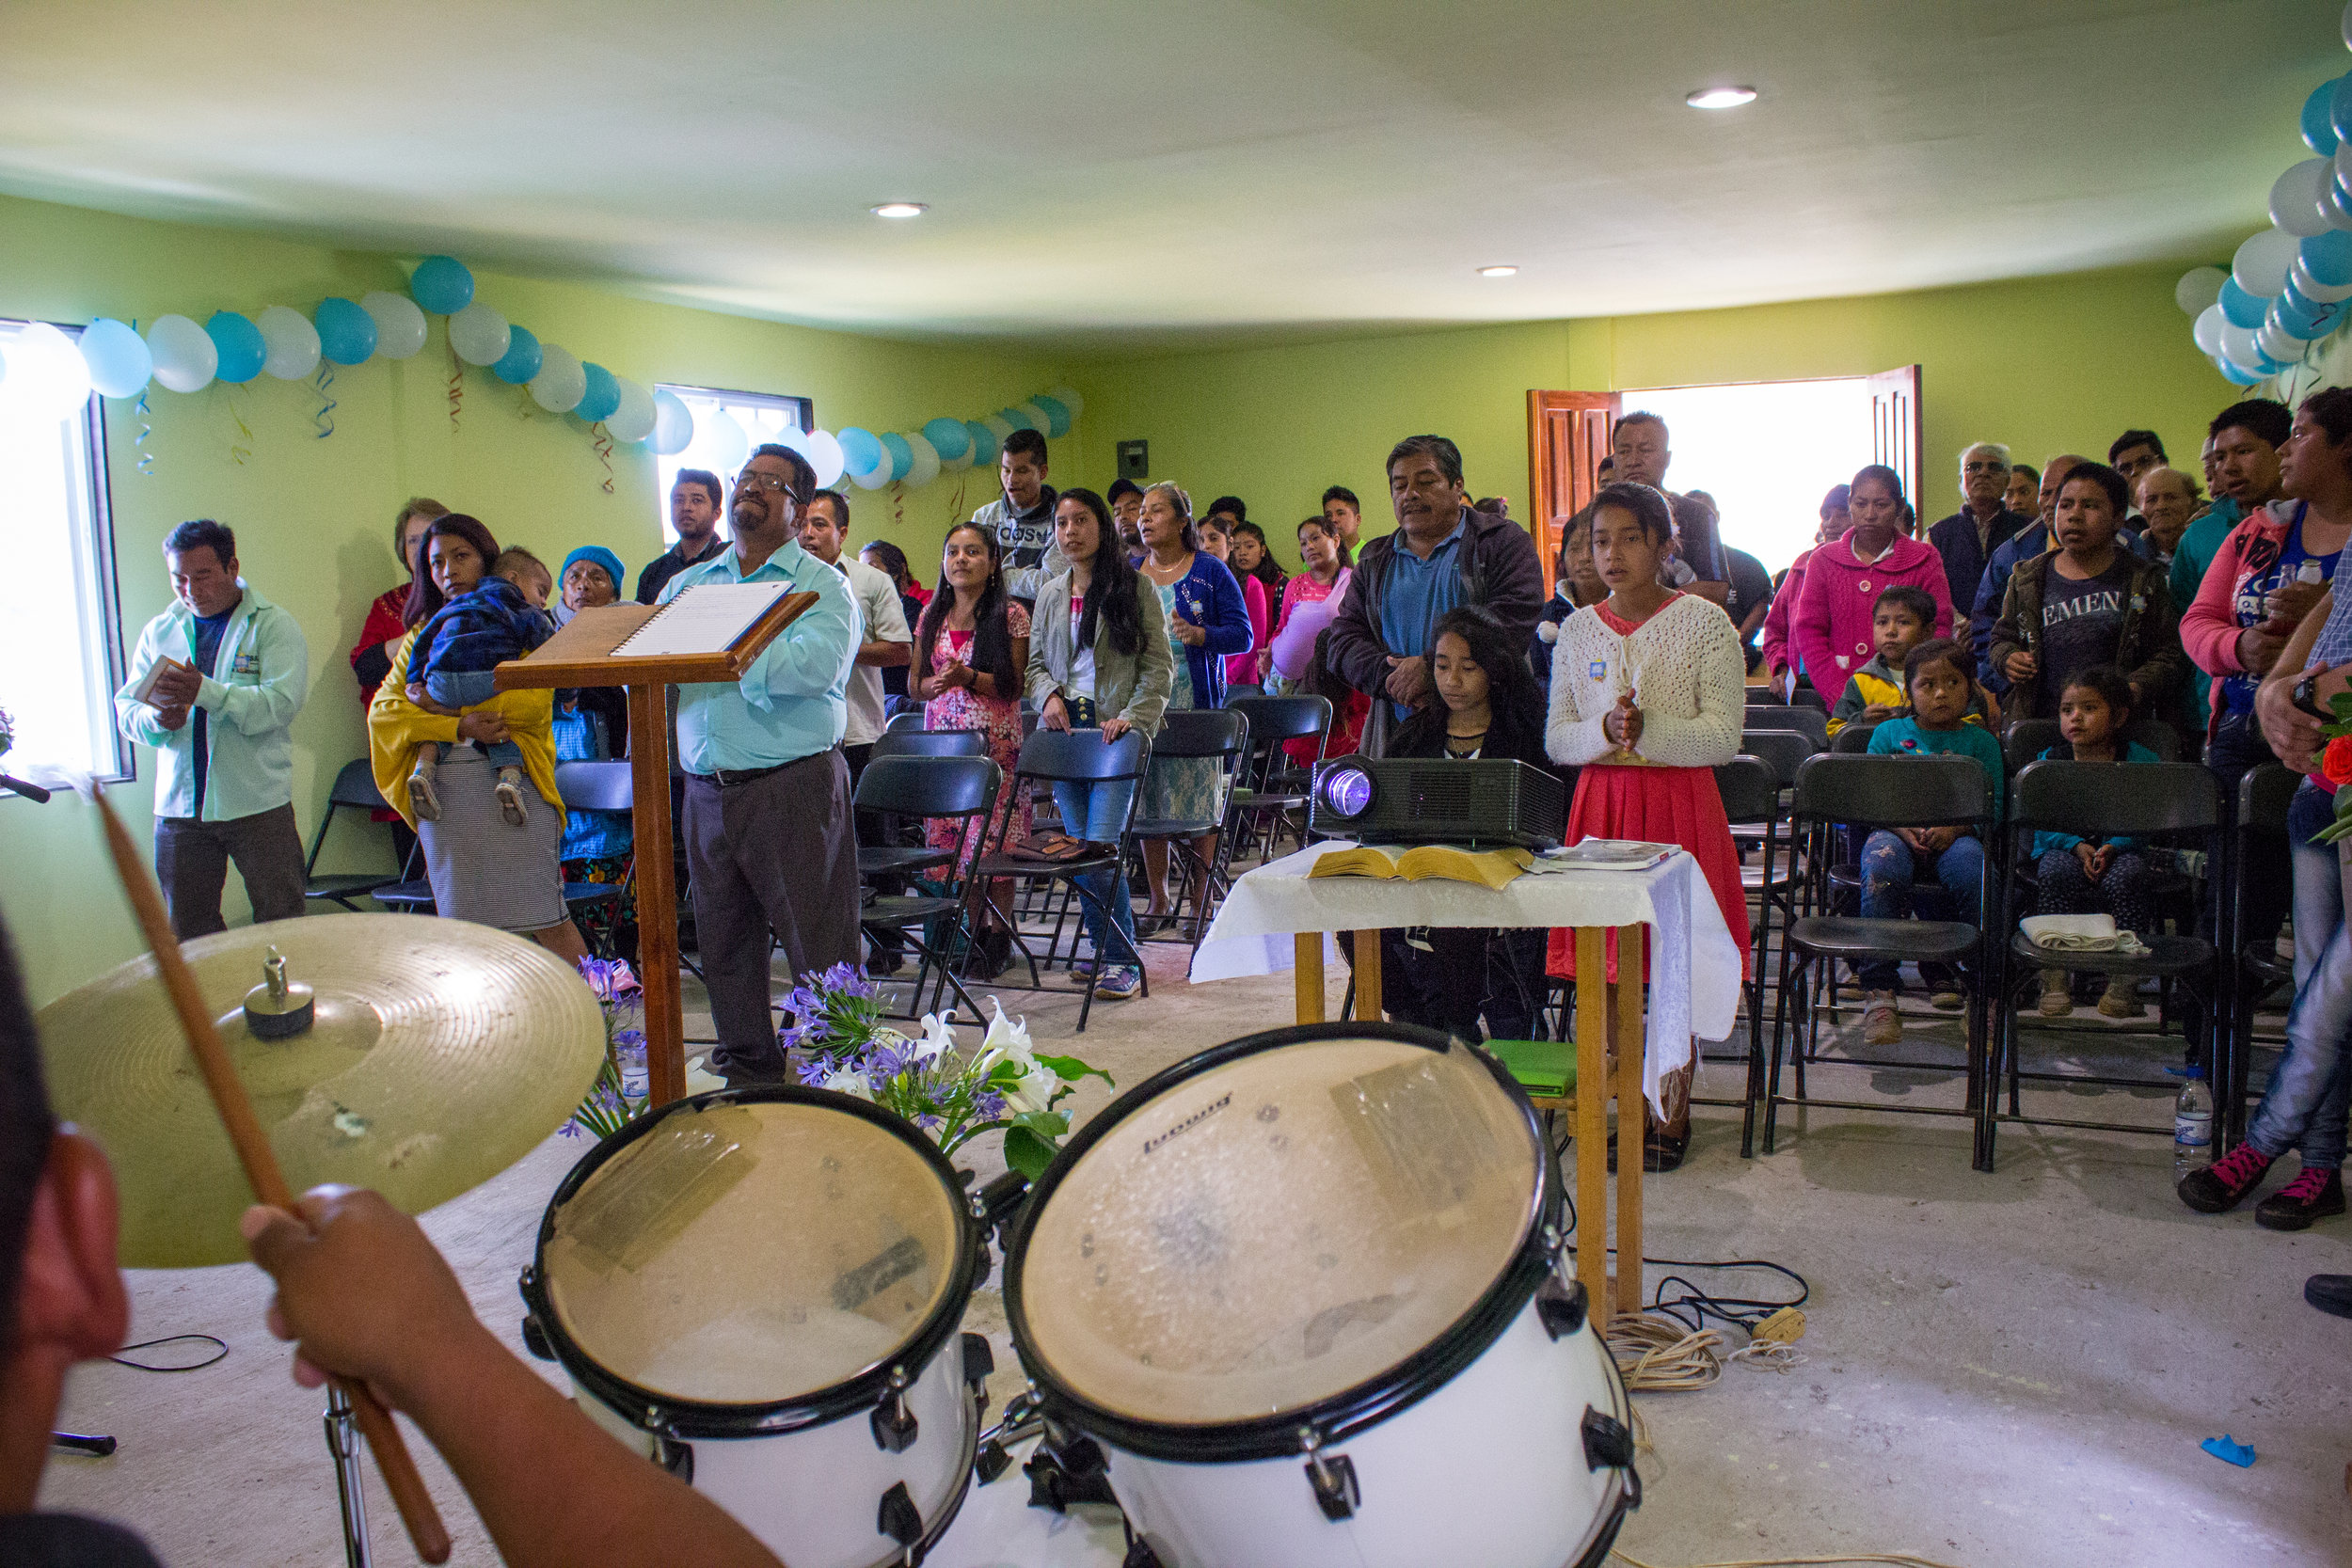  A packed house. Many of the families that Senen and Bernardita invited have expressed an interest in the church, but are not considered Christians. 